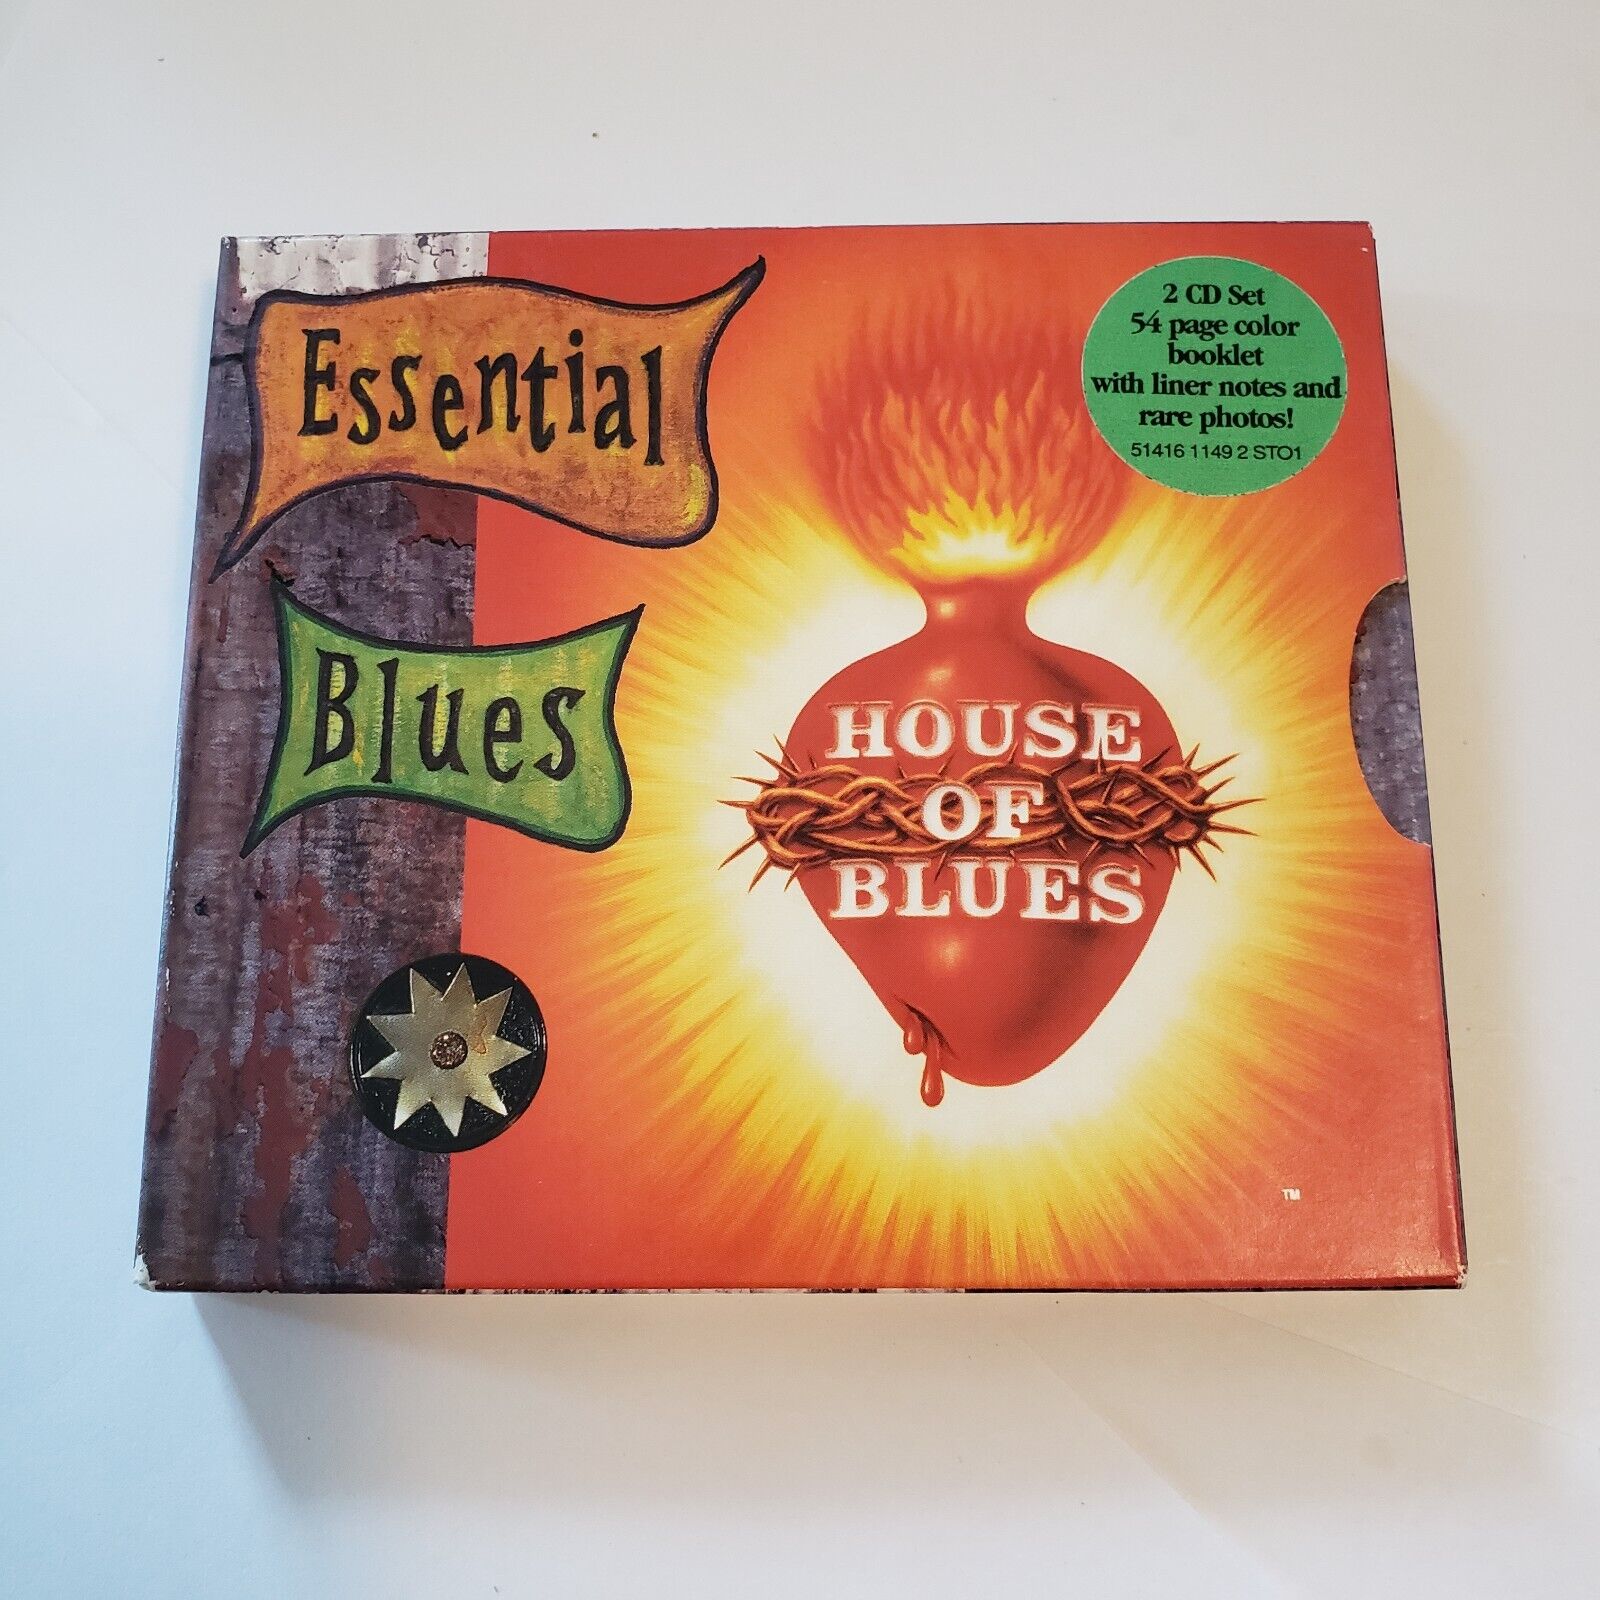 House of Blues Essential Blues V1 2 CD Set 54 Page BookVarious Artists Pre-owned